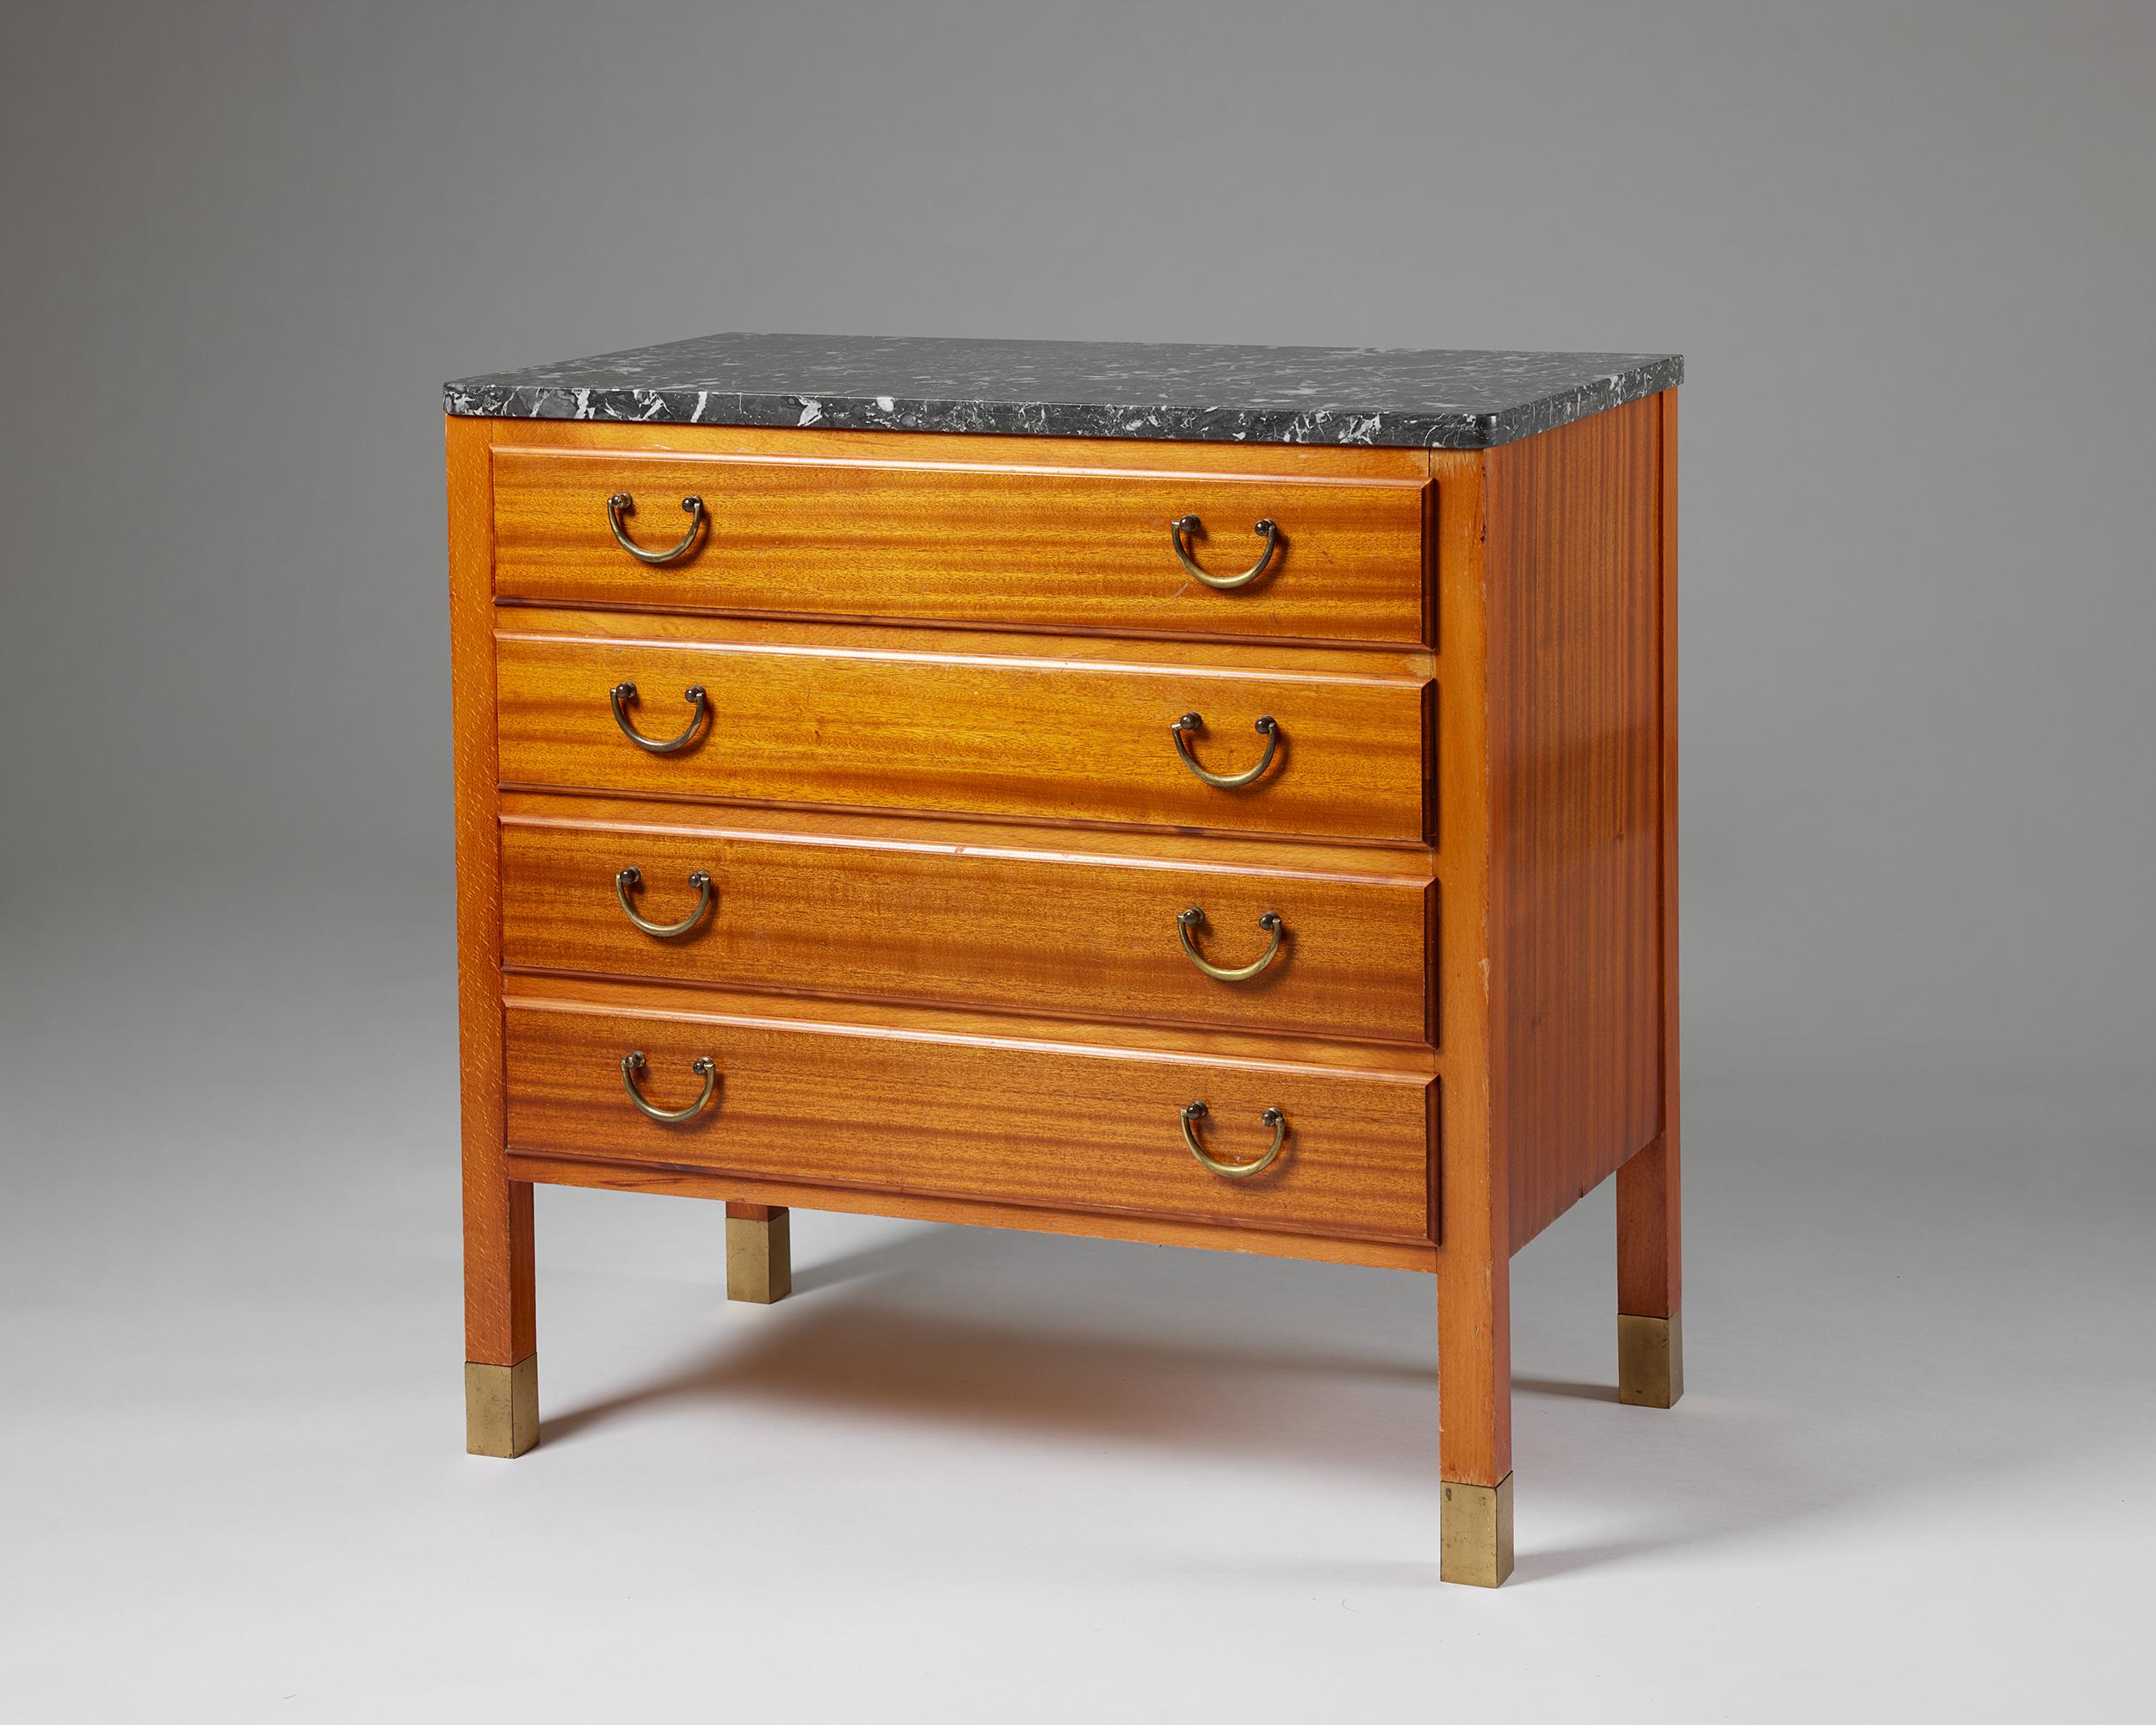 Cabinet, anonymous,
Sweden, 1940s.

Mahogany, beech, marble and brass.

Dimensions:
H: 70 cm / 2' 3 1/2''
W: 71 cm / 2' 4''
D: 42 cm / 16 1/2''